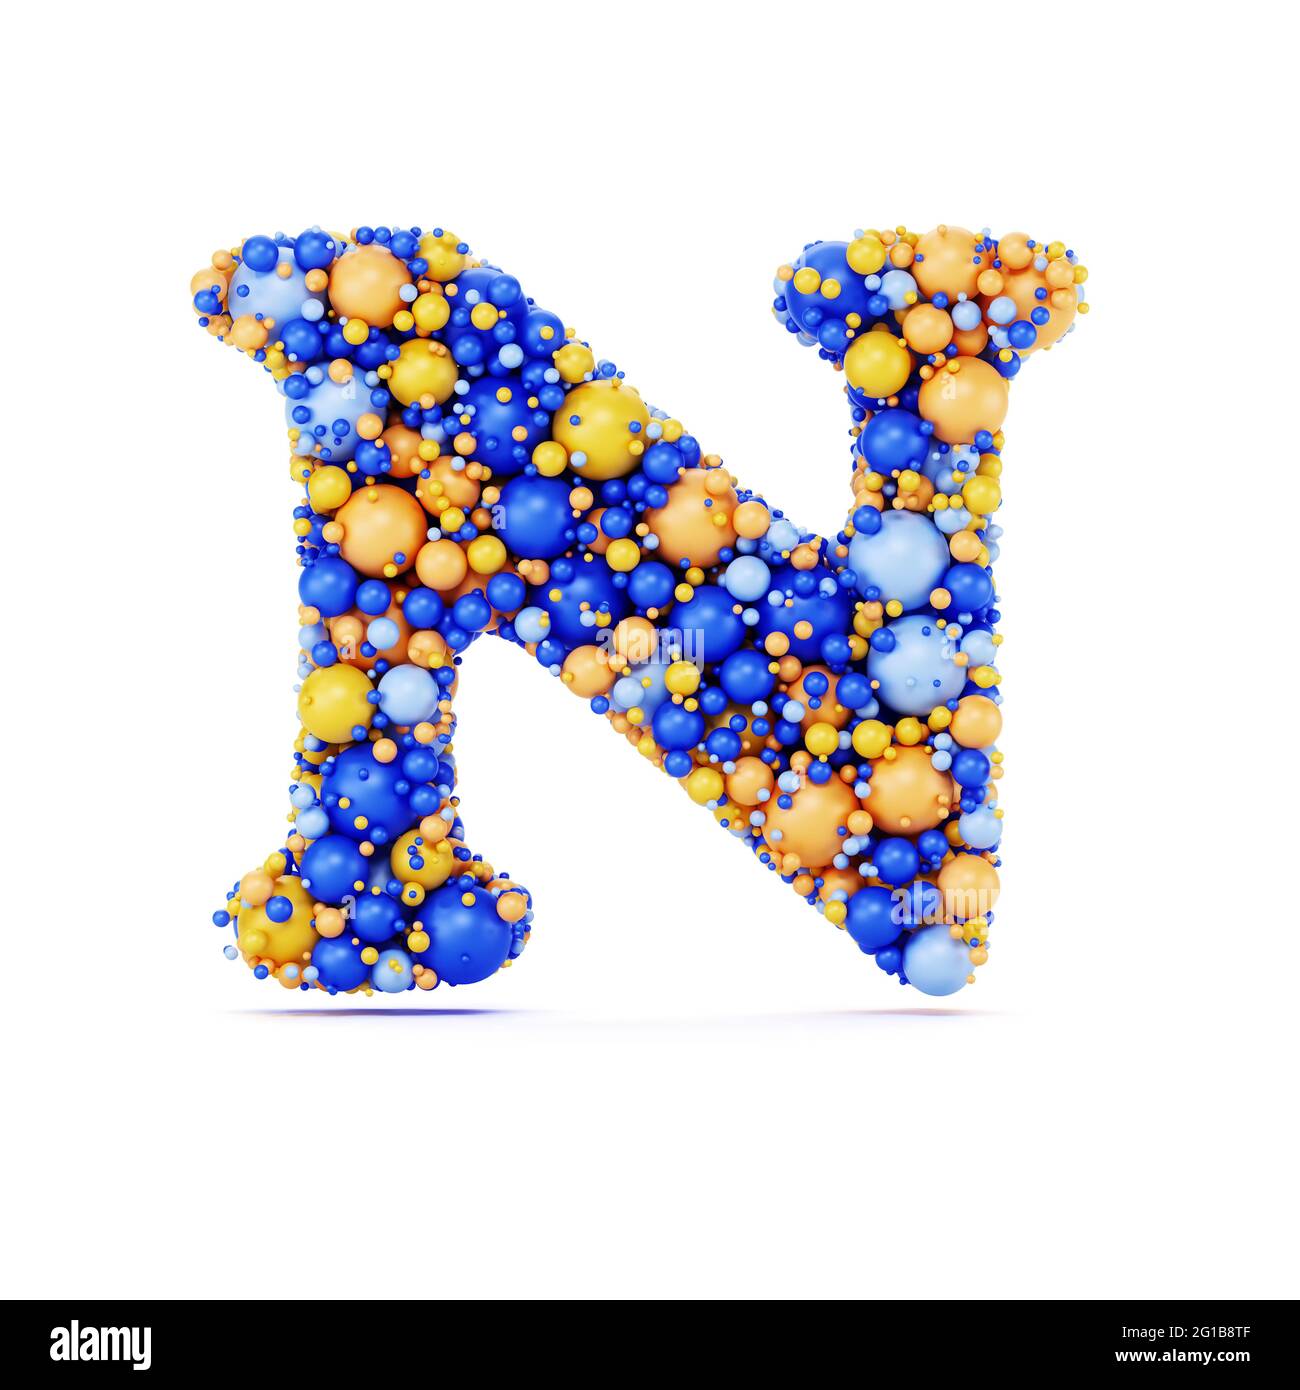 N letter with colored shiny balls. Realistic 3d rendering illustration. Isolated on white background with shadow cast Stock Photo